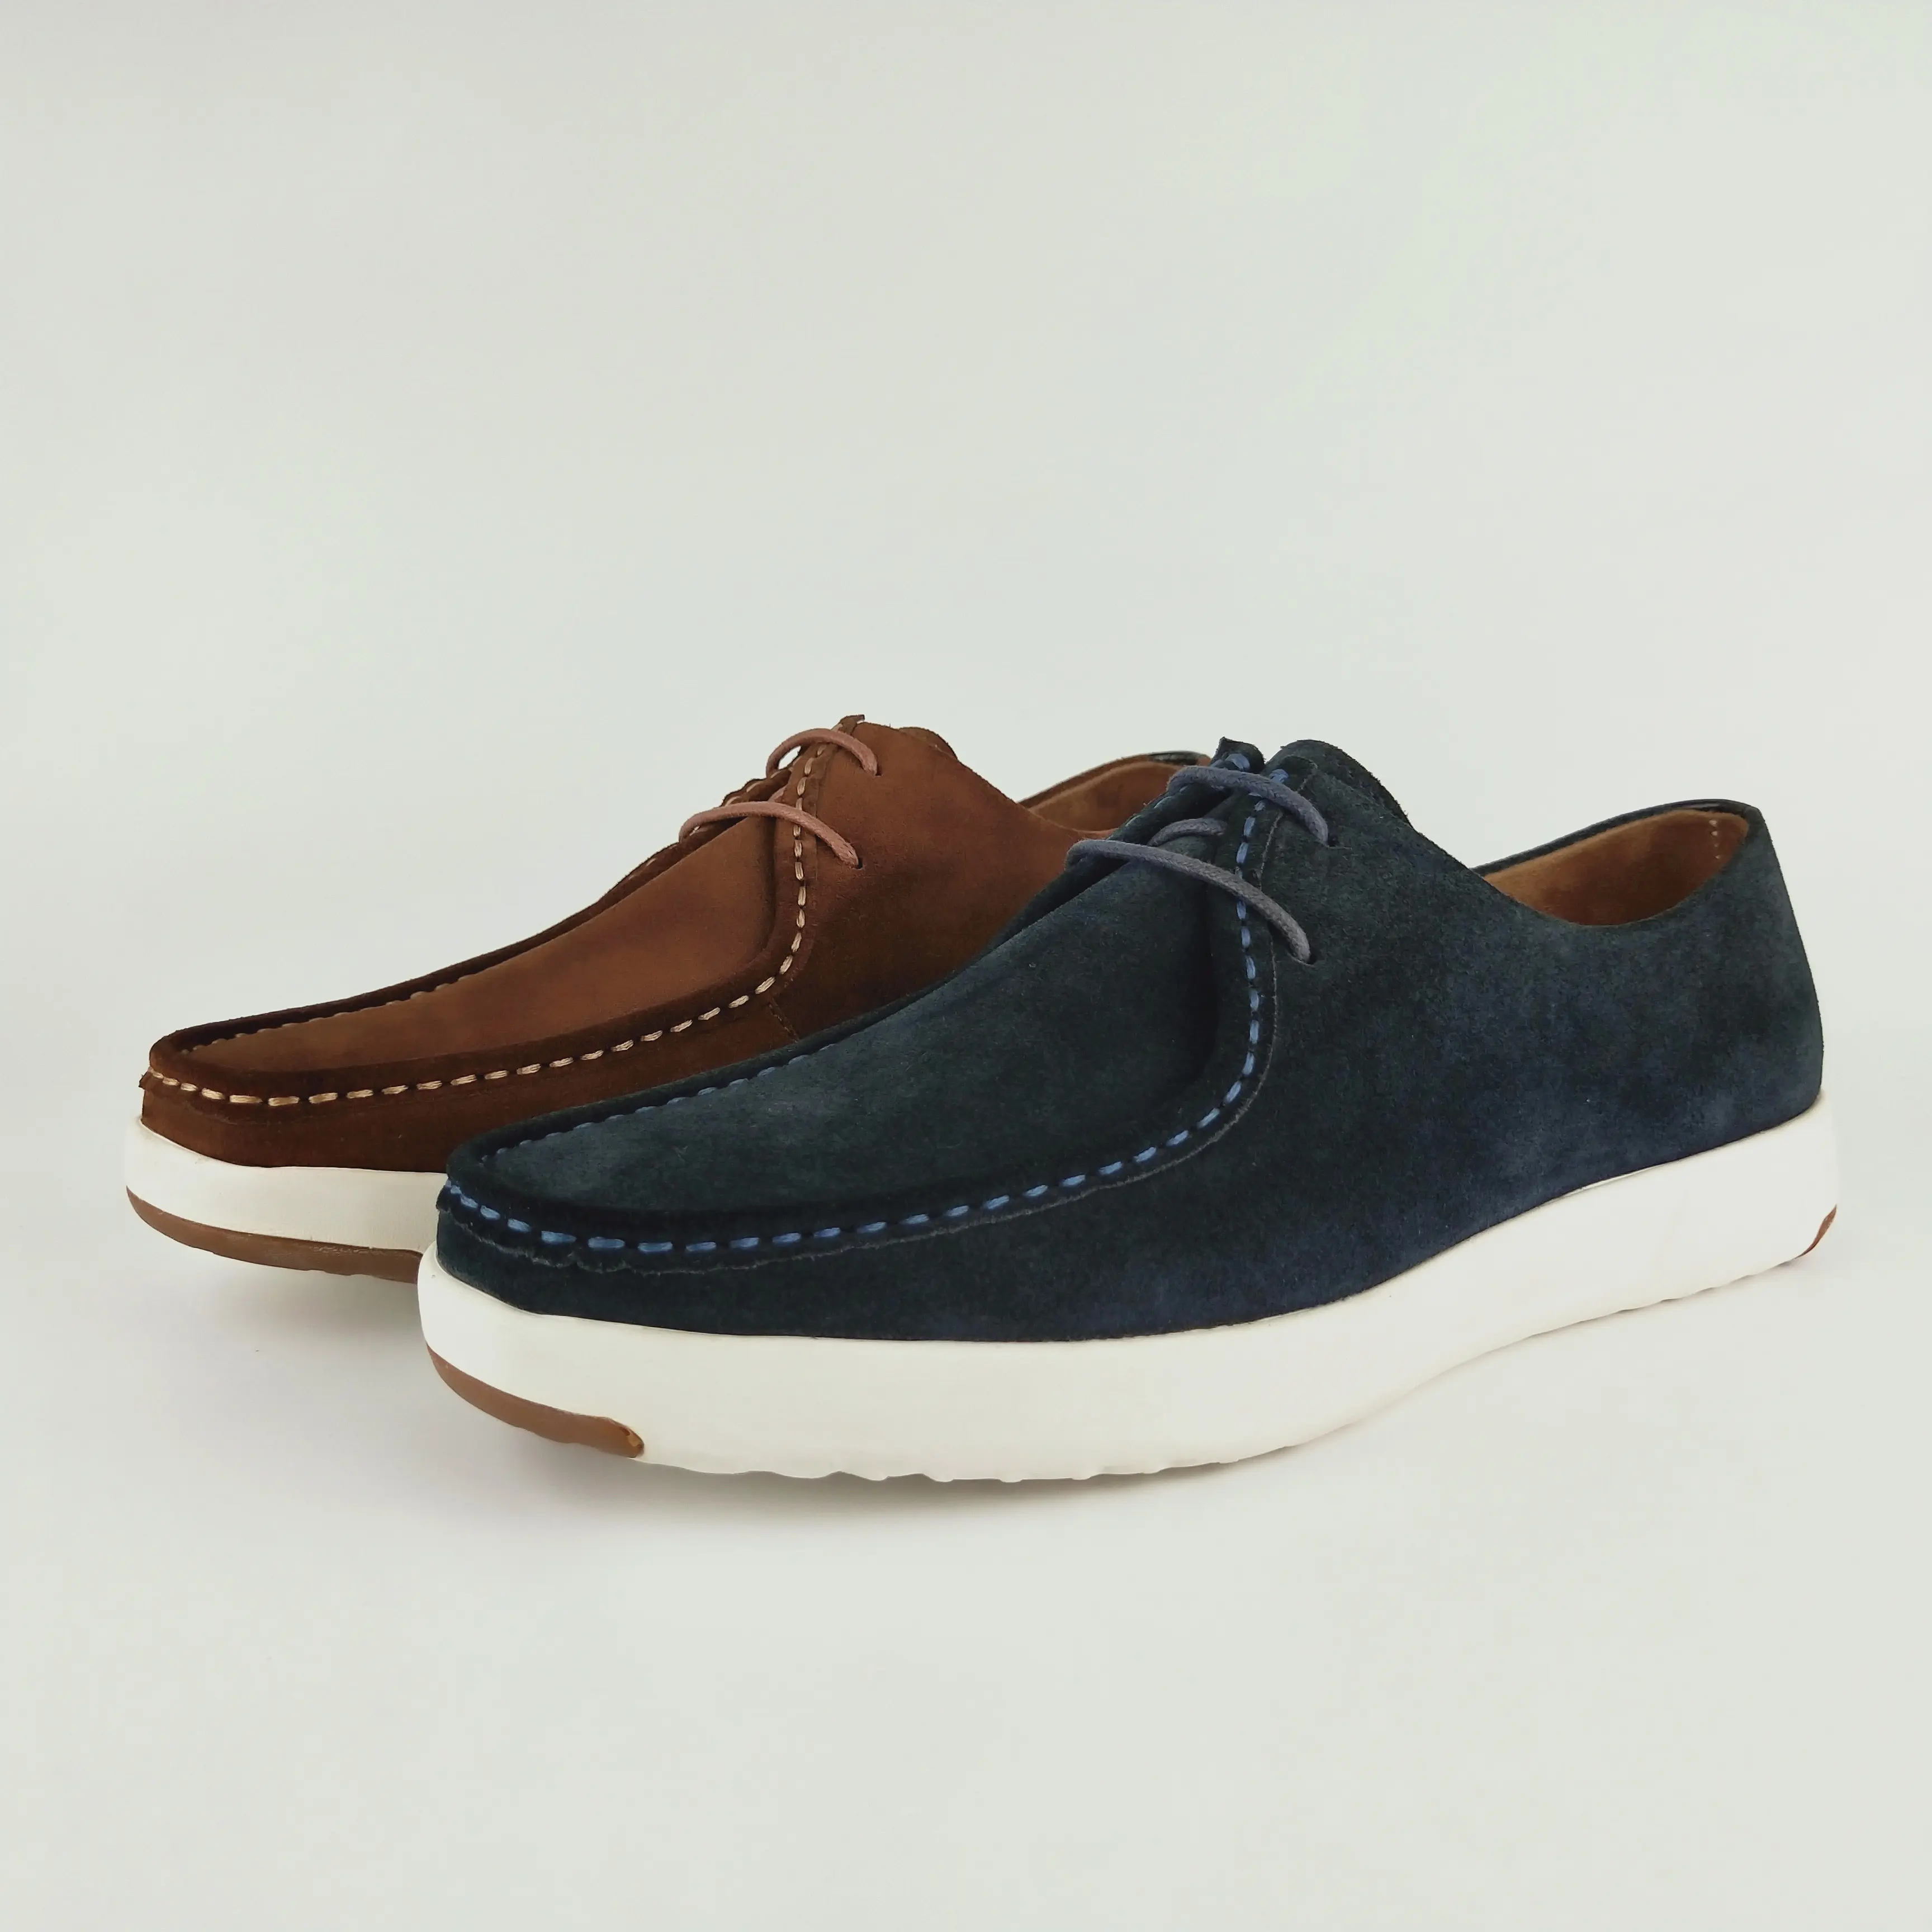 Hot sale to Germany Low price beautiful design leather shoes men casual